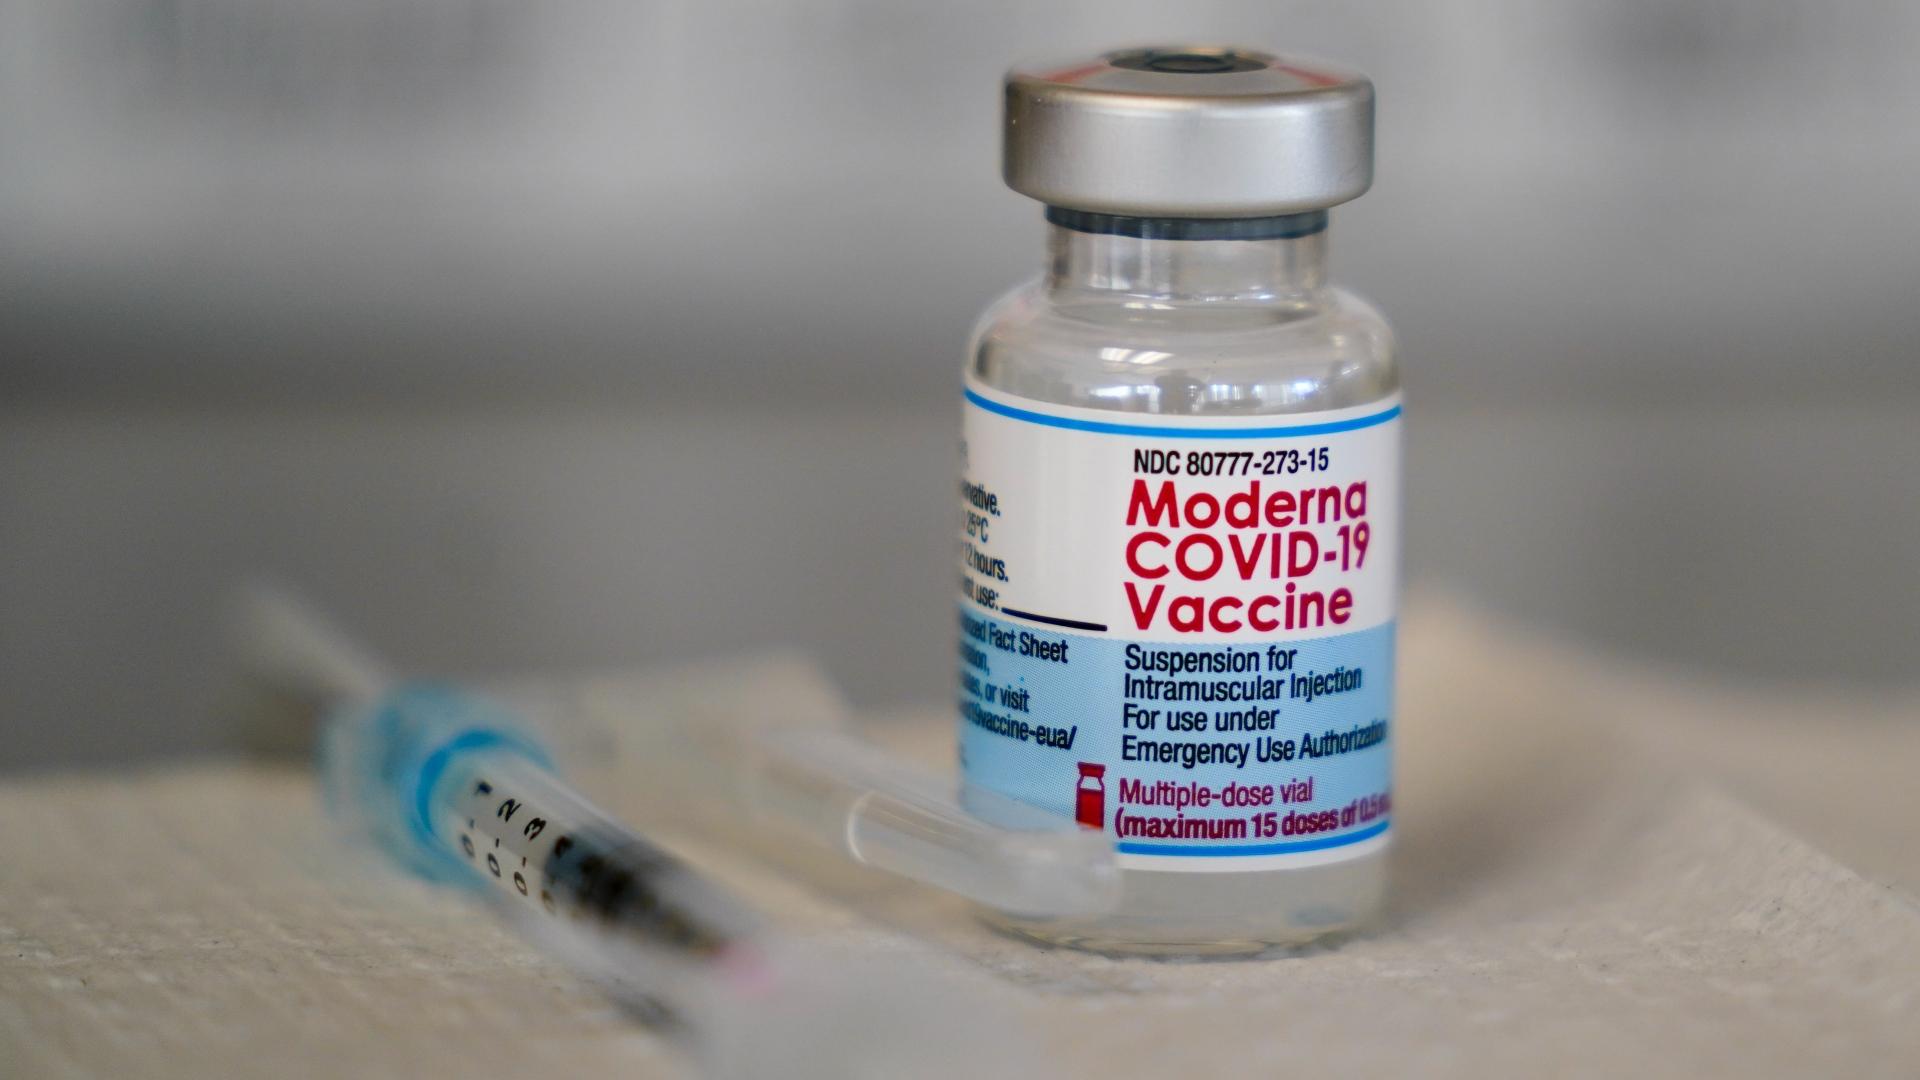 A vial of the Moderna COVID-19 vaccine is seen during a vaccination clinic at the Norristown Public Health Center in Norristown, Pa., Tuesday, Dec. 7, 2021. (AP Photo / Matt Rourke, File)